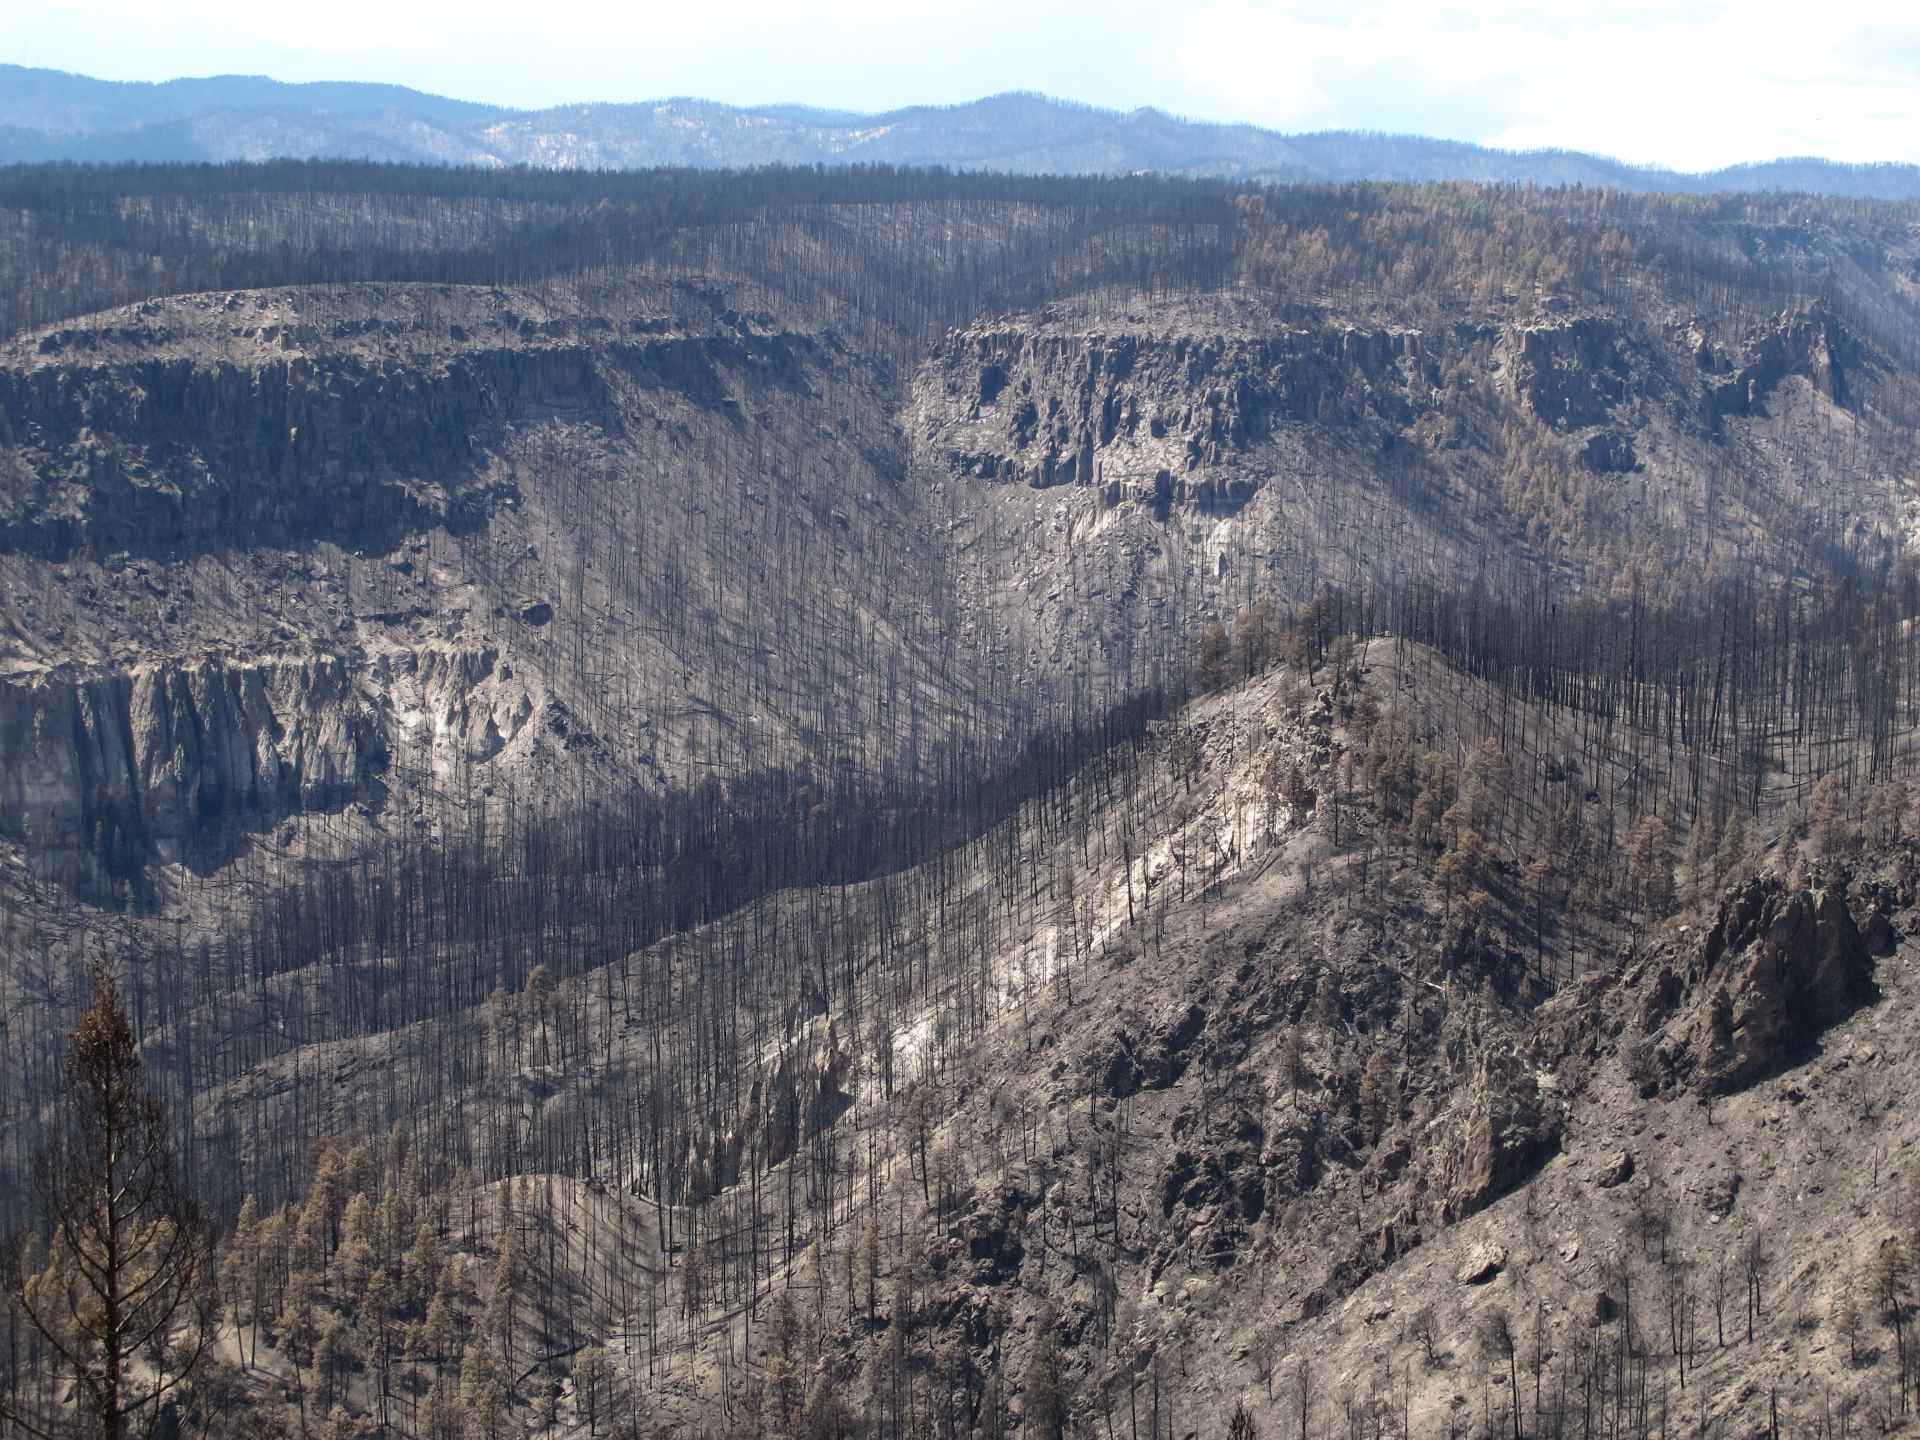 Trees killed by the Las Conchas Fire in the Jemez Mountains, New Mexico – August 2011